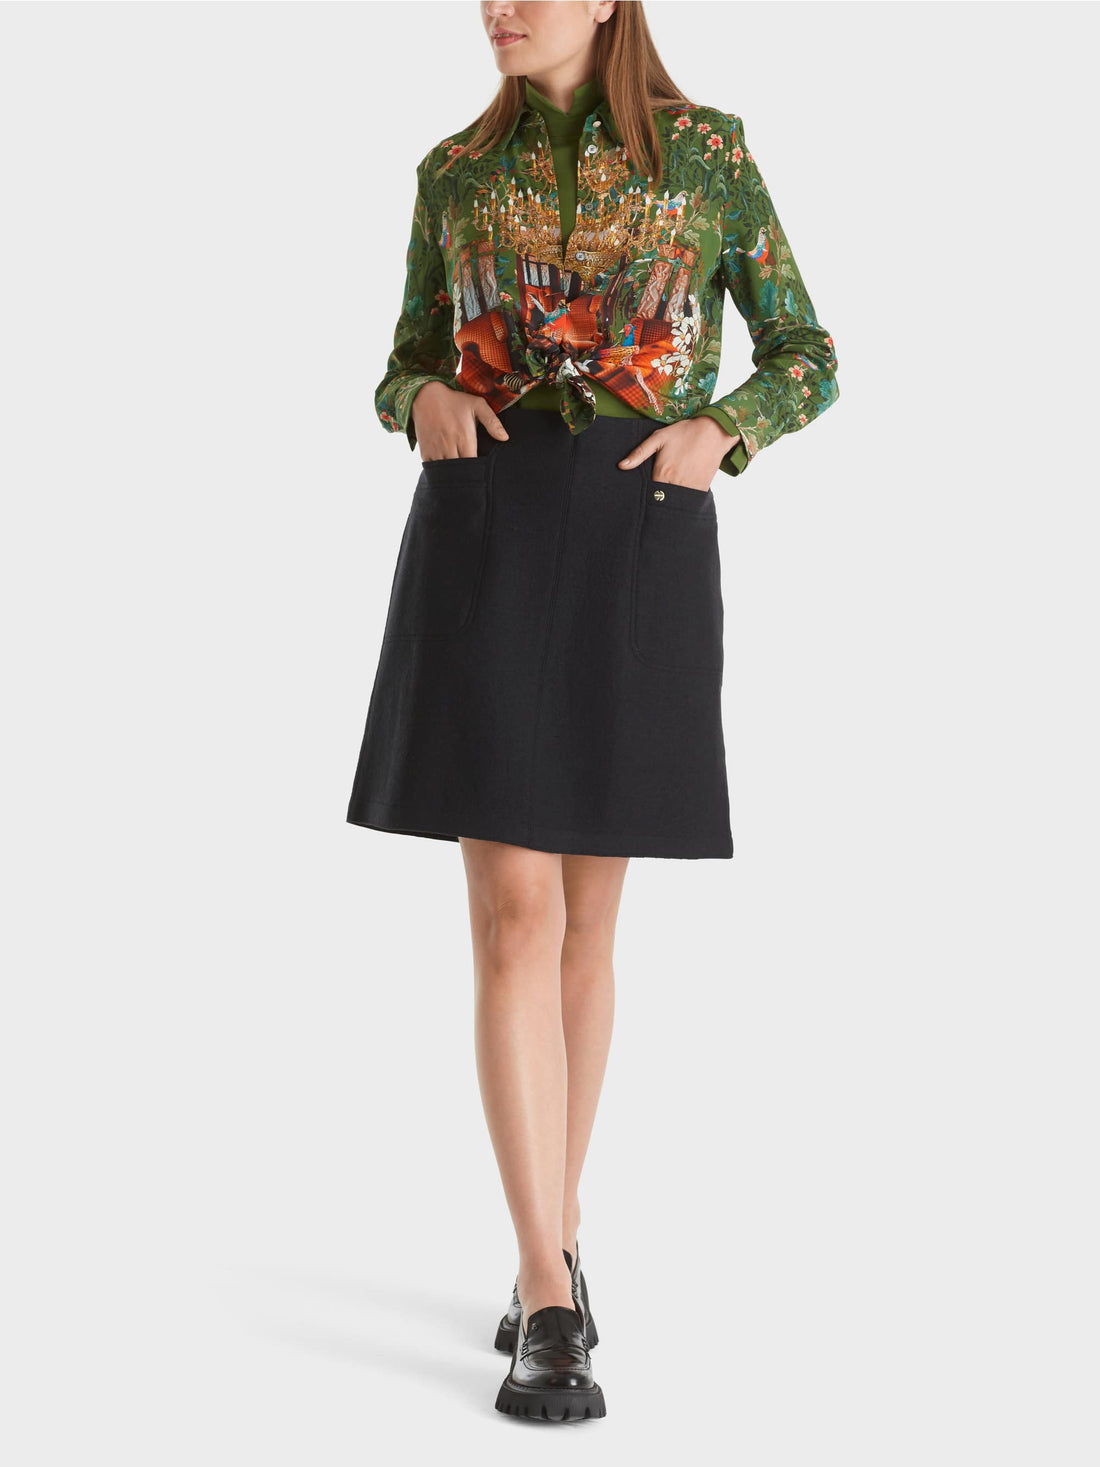 Silk Blouse With Surreal Print_VC 51.41 W72_573_01